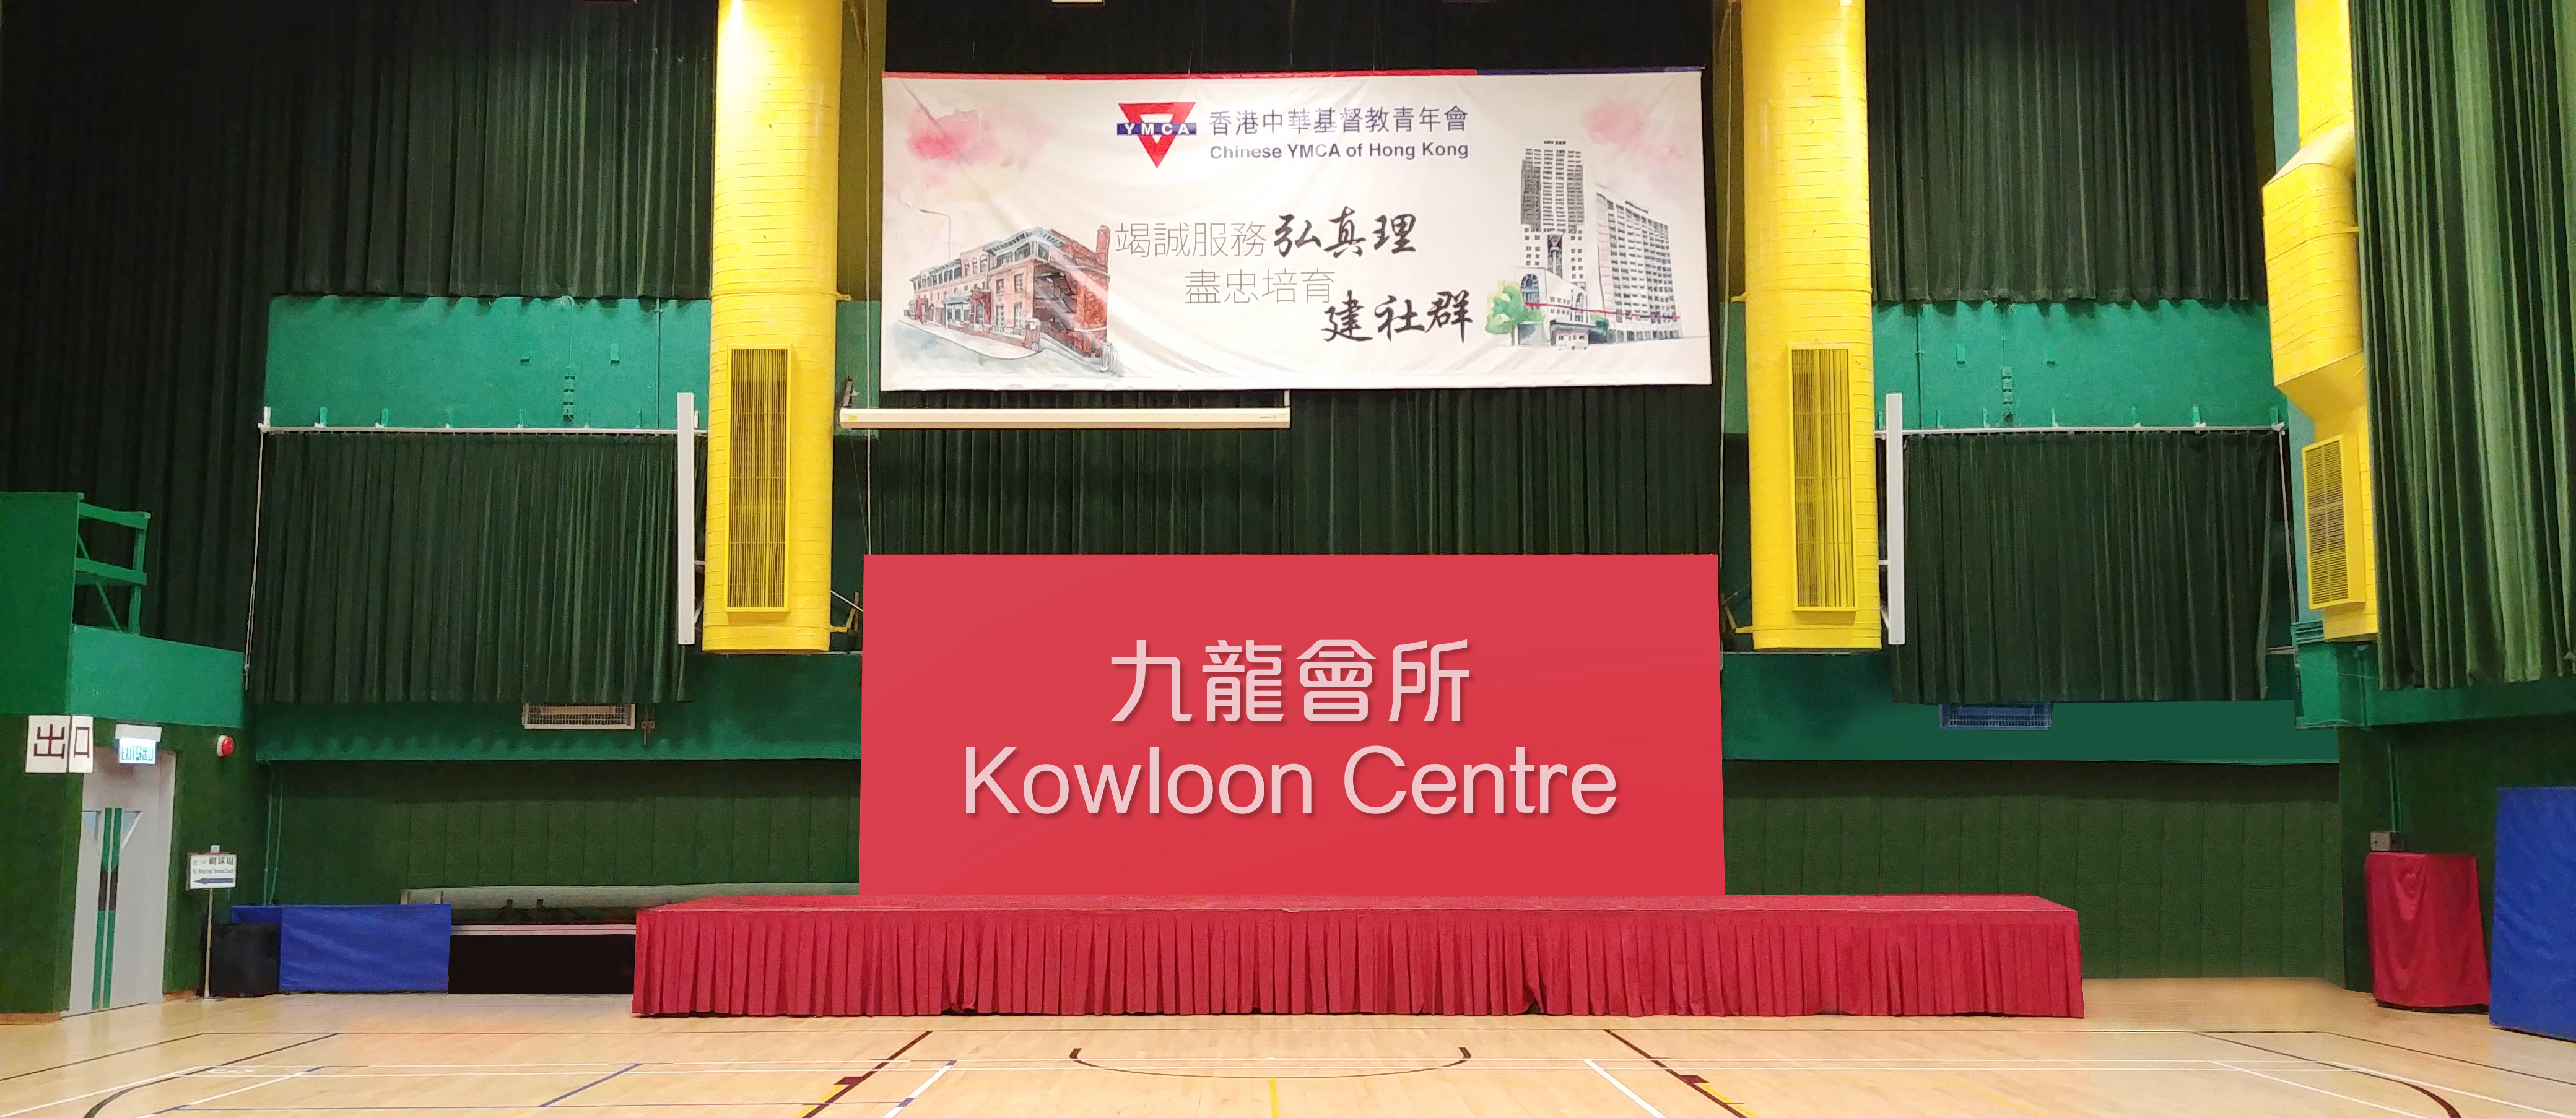 Kowloon Centre Our Service